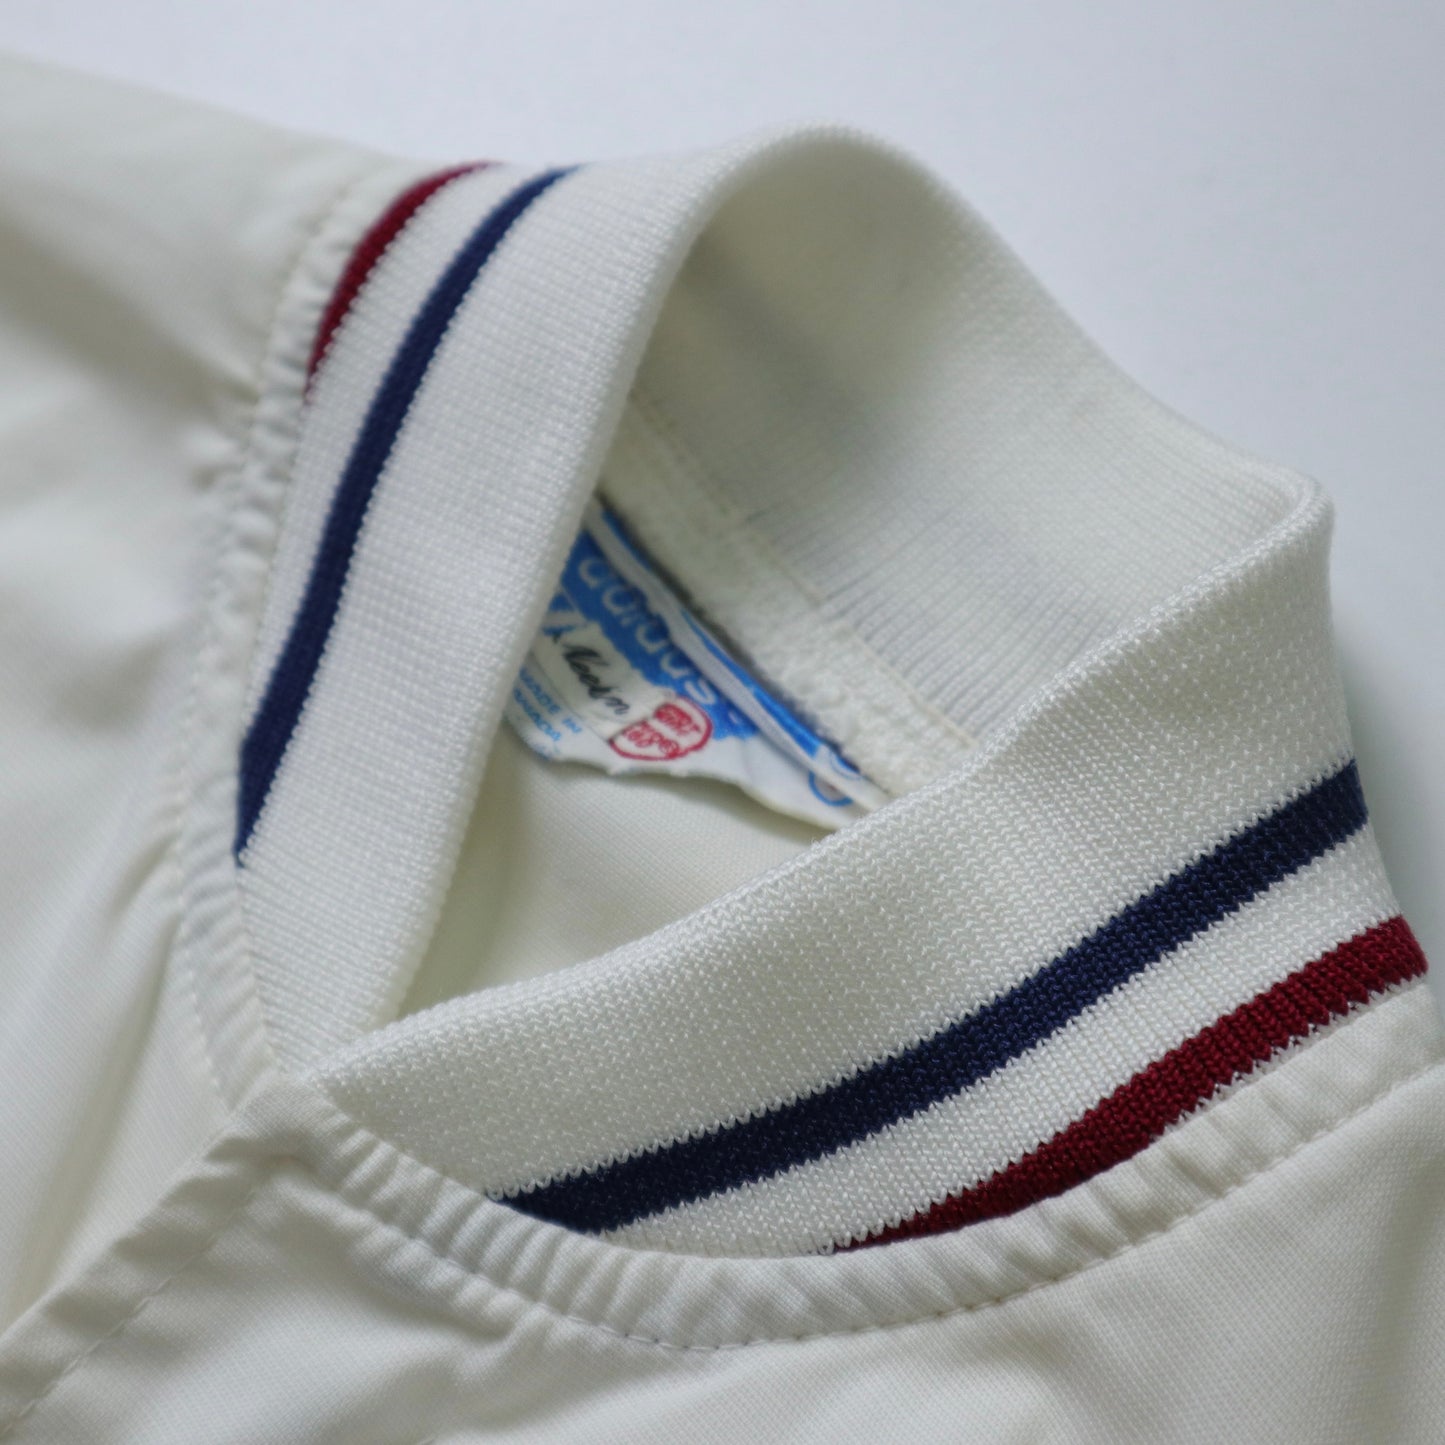 1970s Canadian-made Adidas white embroidered logo sports jacket